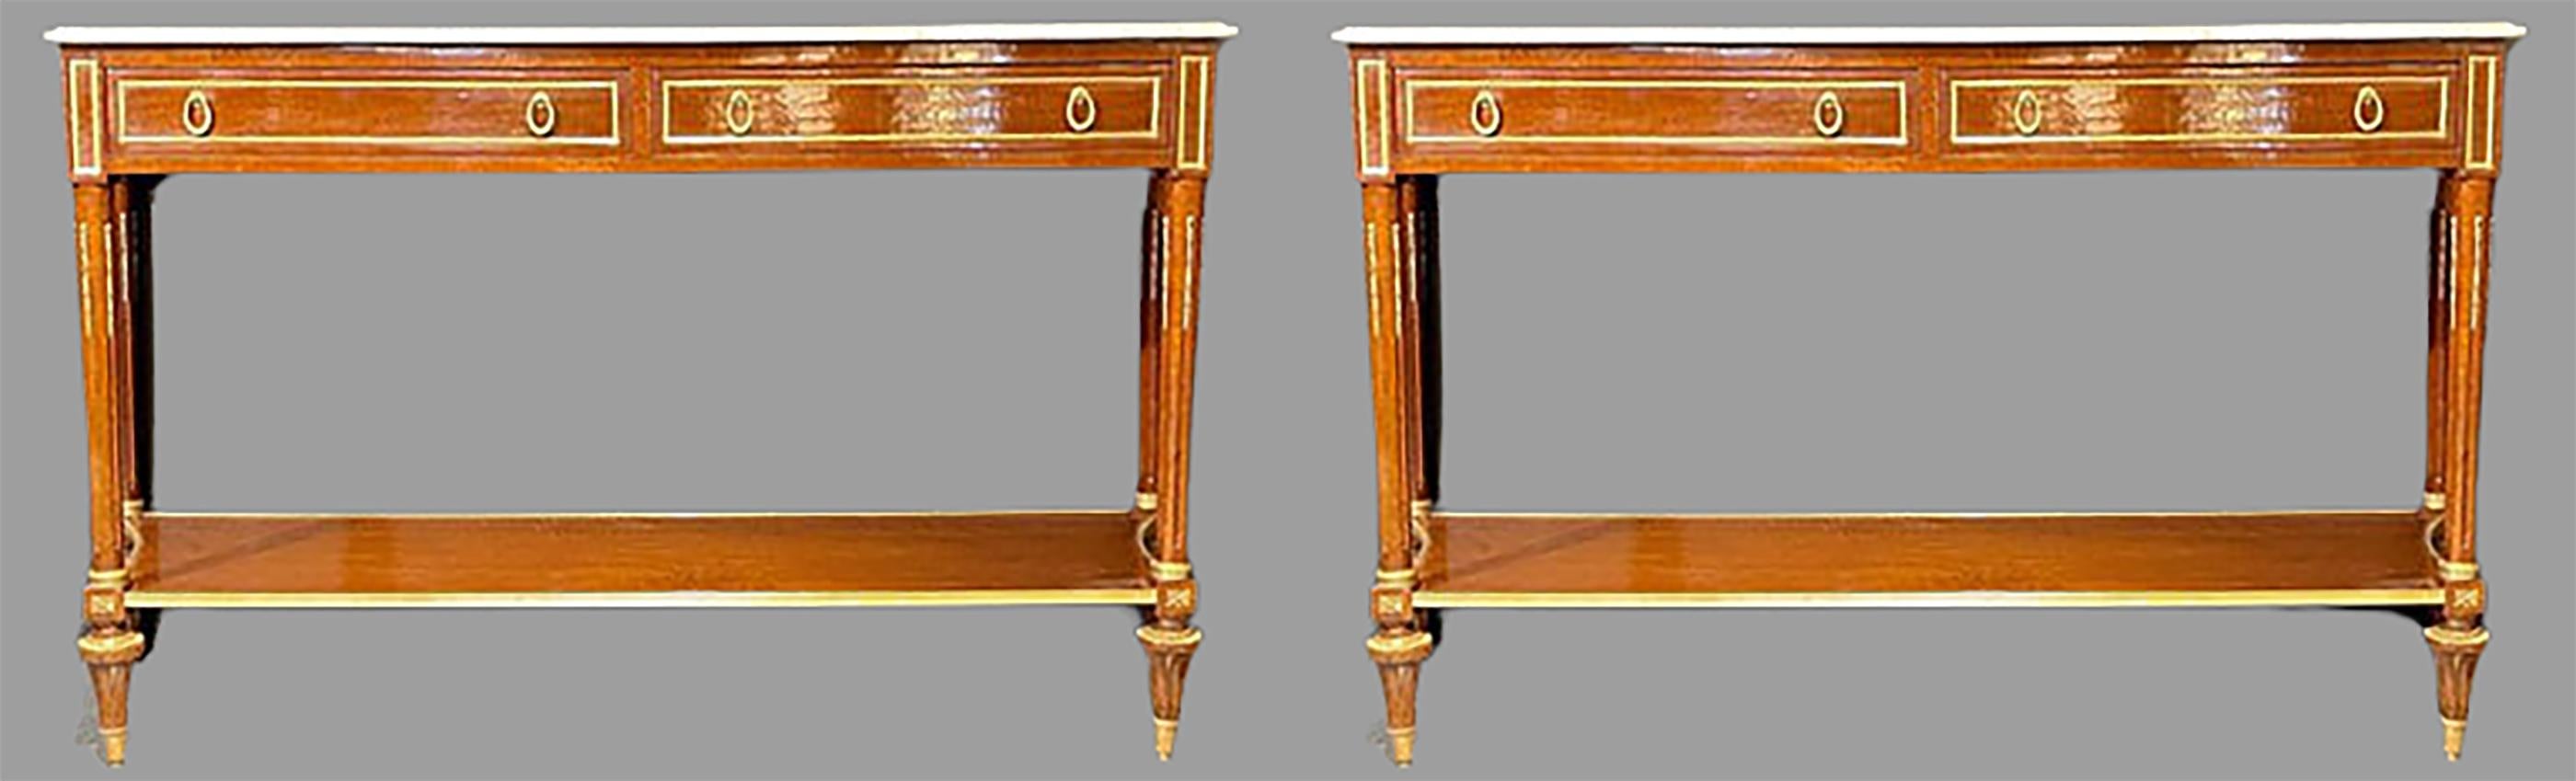 A fine pair of Louis XVI style marble top consoles or sideboards in the Maison Jansen Manner. These simply stunning concave sided consoles have tortoiseshell veneers that have been wonderfully refinished. The bronze framed drawers supporting a white